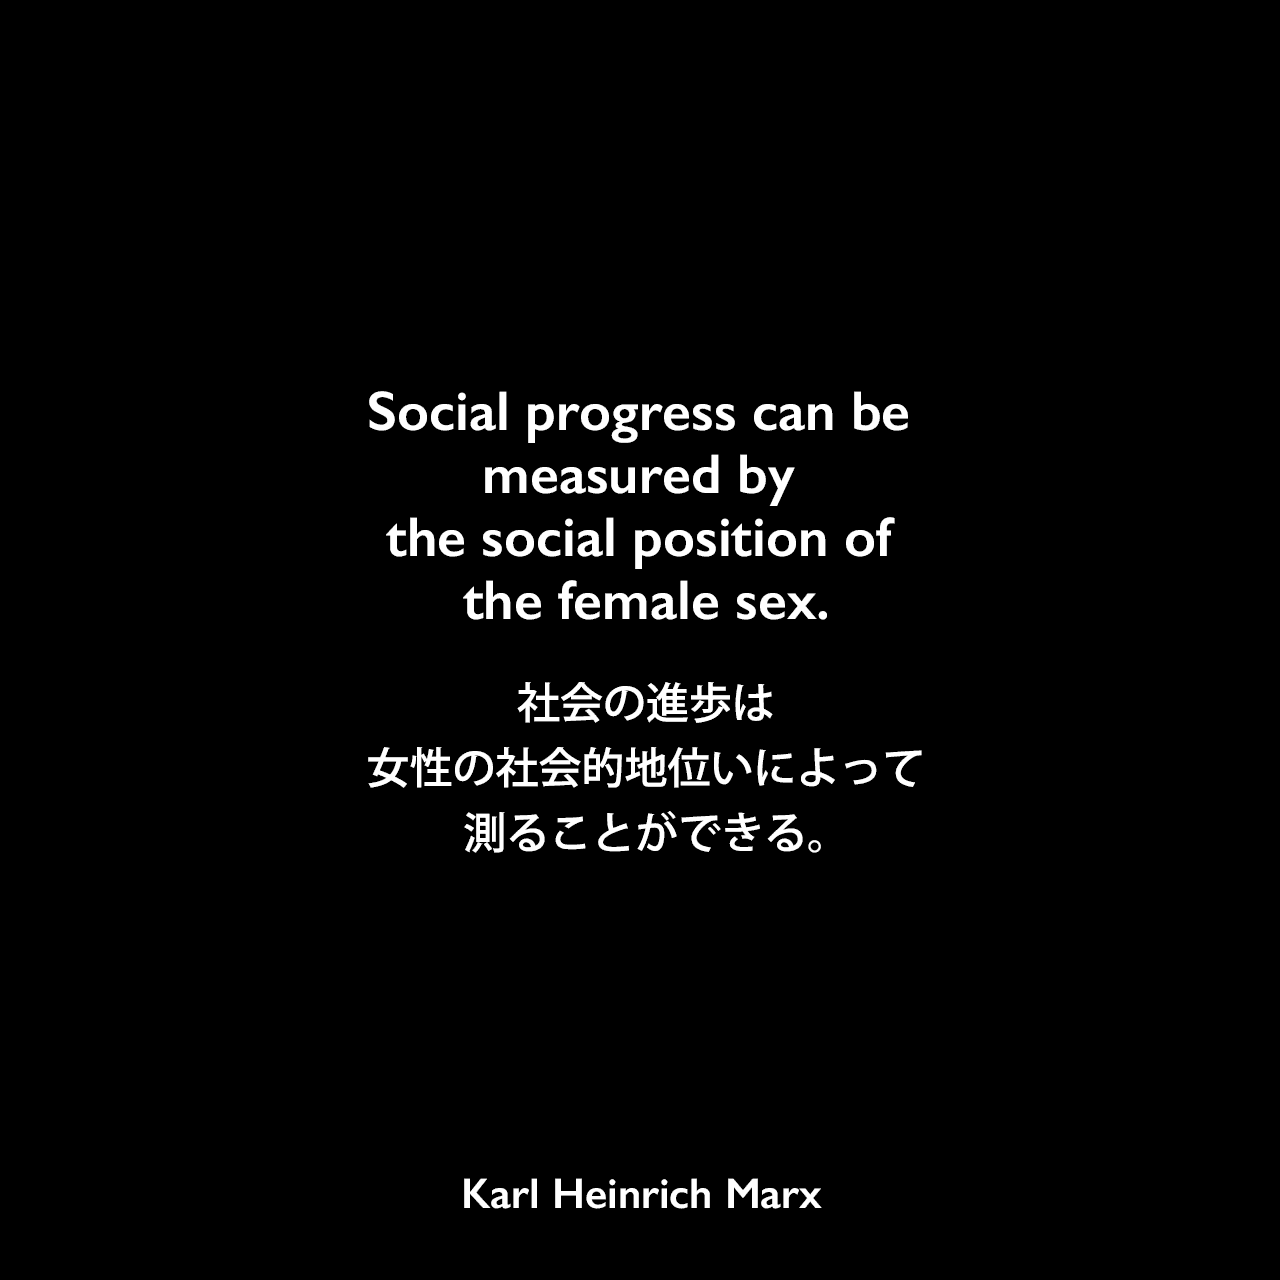 Social progress can be measured by the social position of the female sex.社会の進歩は女性の社会的地位いによって測ることができる。Karl Heinrich Marx